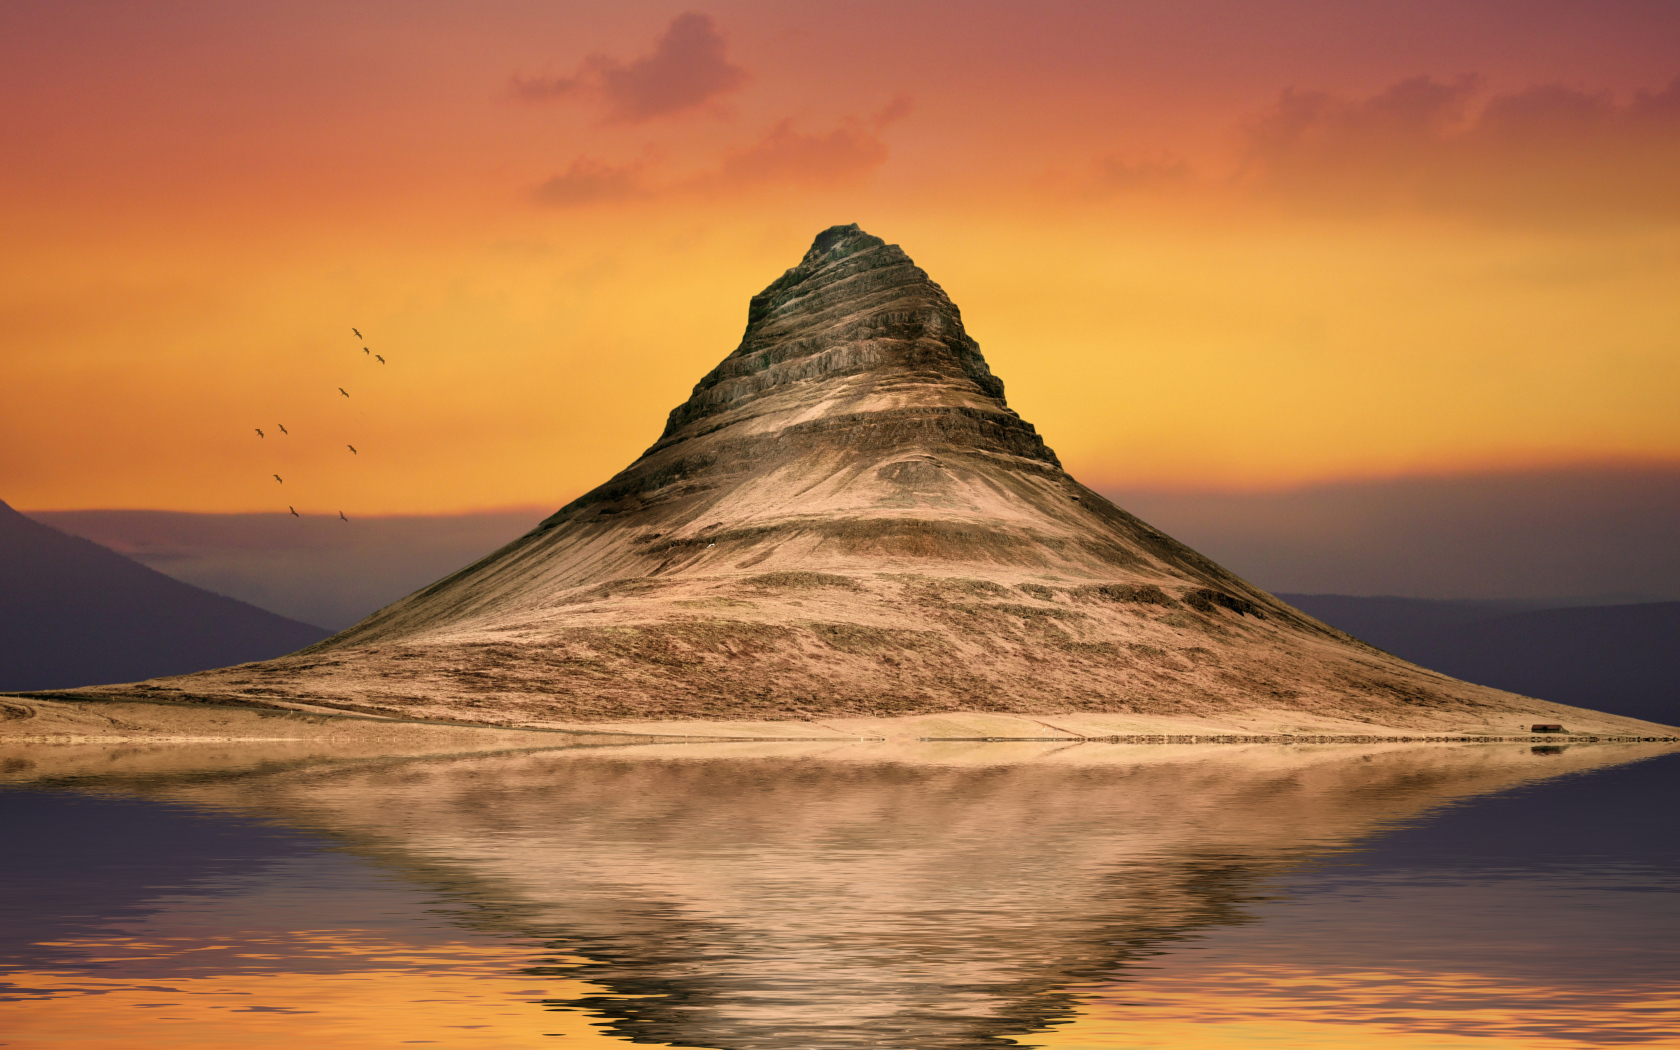 Mountain reflected in the water against the sky at sunset